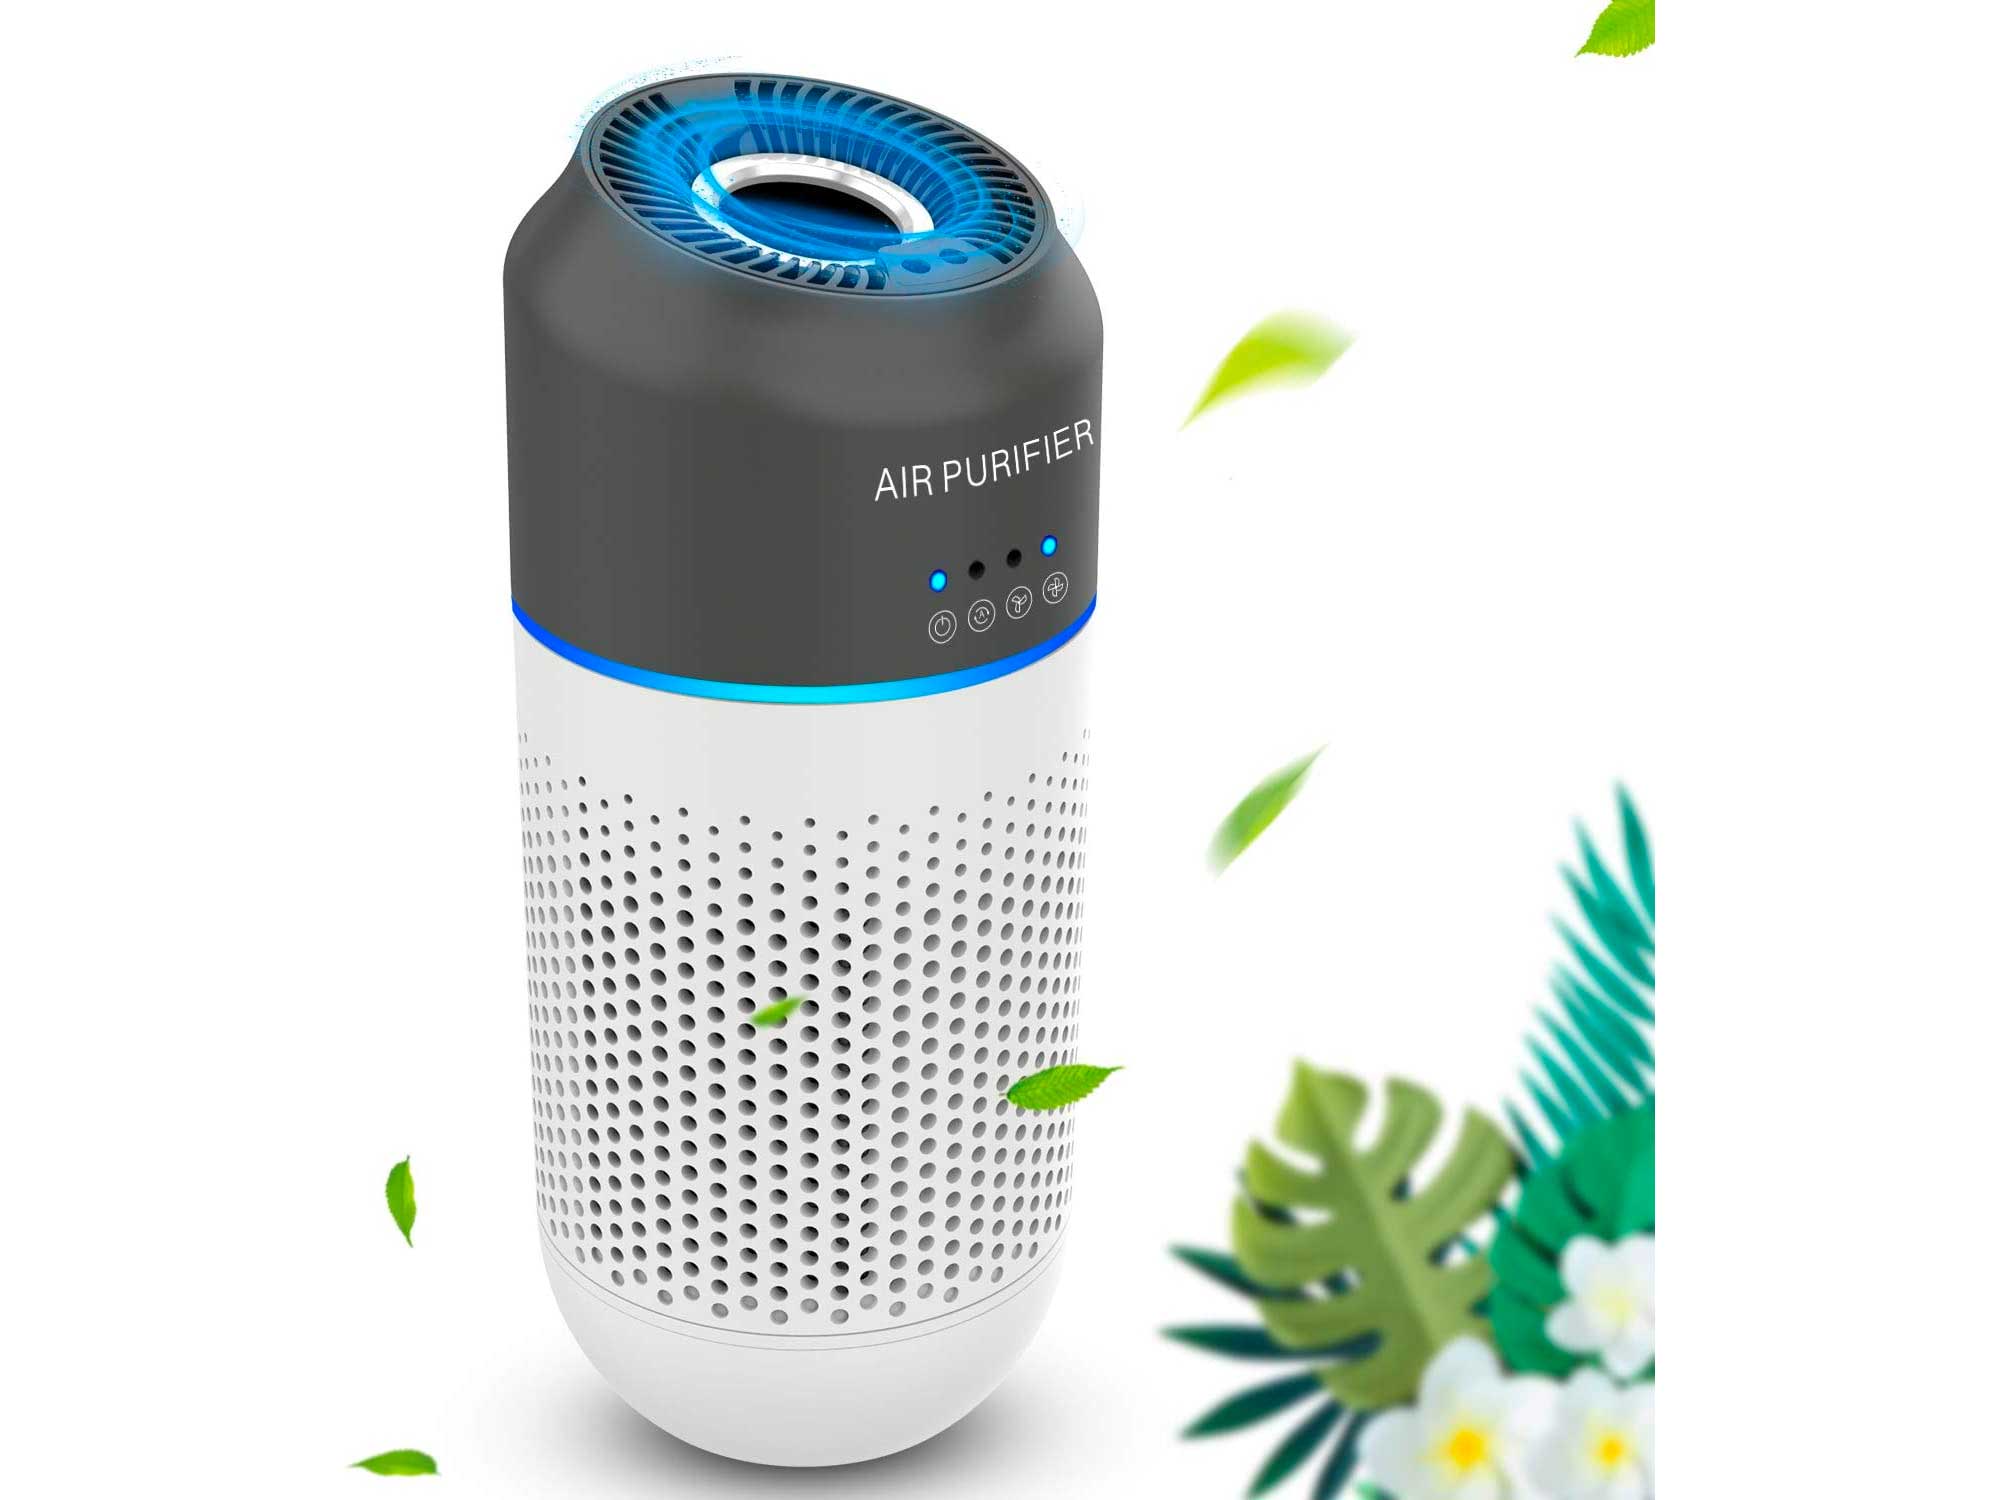 ITSHINY Car Air Purifier & Mini HEPA Air Purifier with 4-Stage Filtration Air Cleaner for Car & Office, Eliminates Smoke, Dust, Pollen, Pet Dander, Low Noise and USB Powered